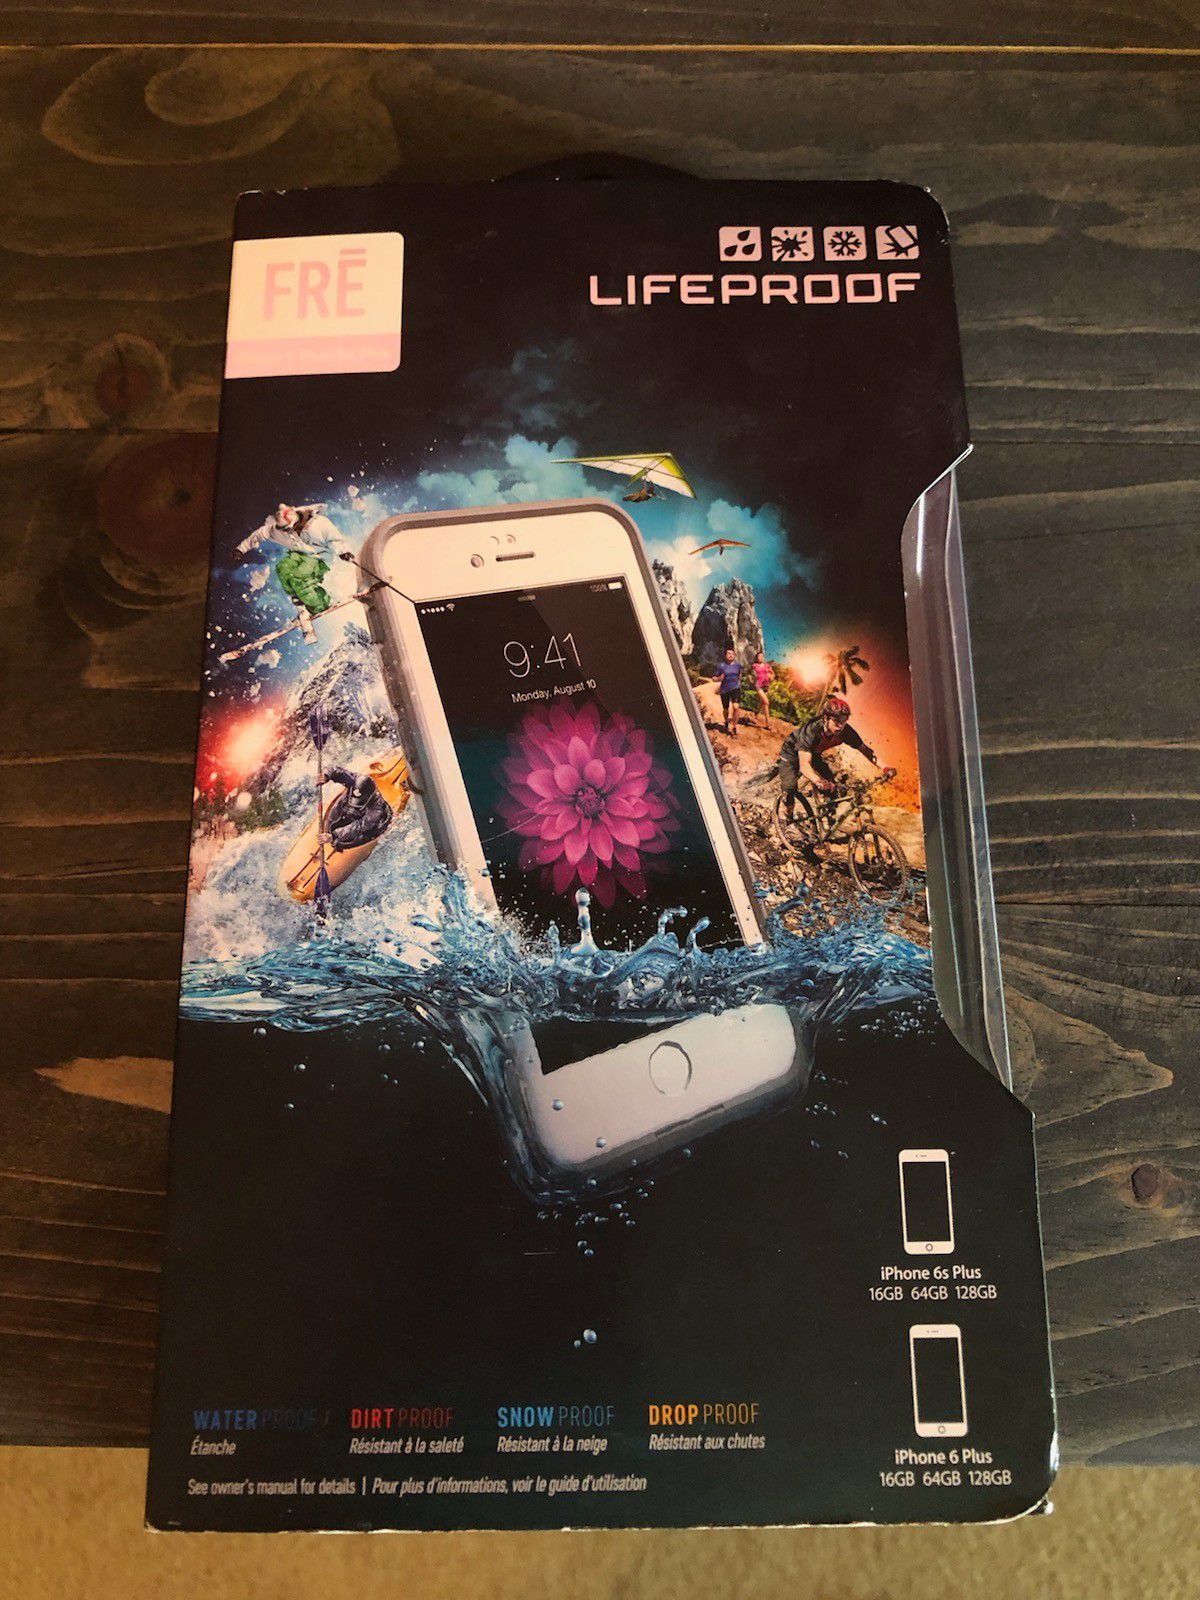 FRE Lifeproof White and Gray Case Iphone 6 Plus/6S Plus